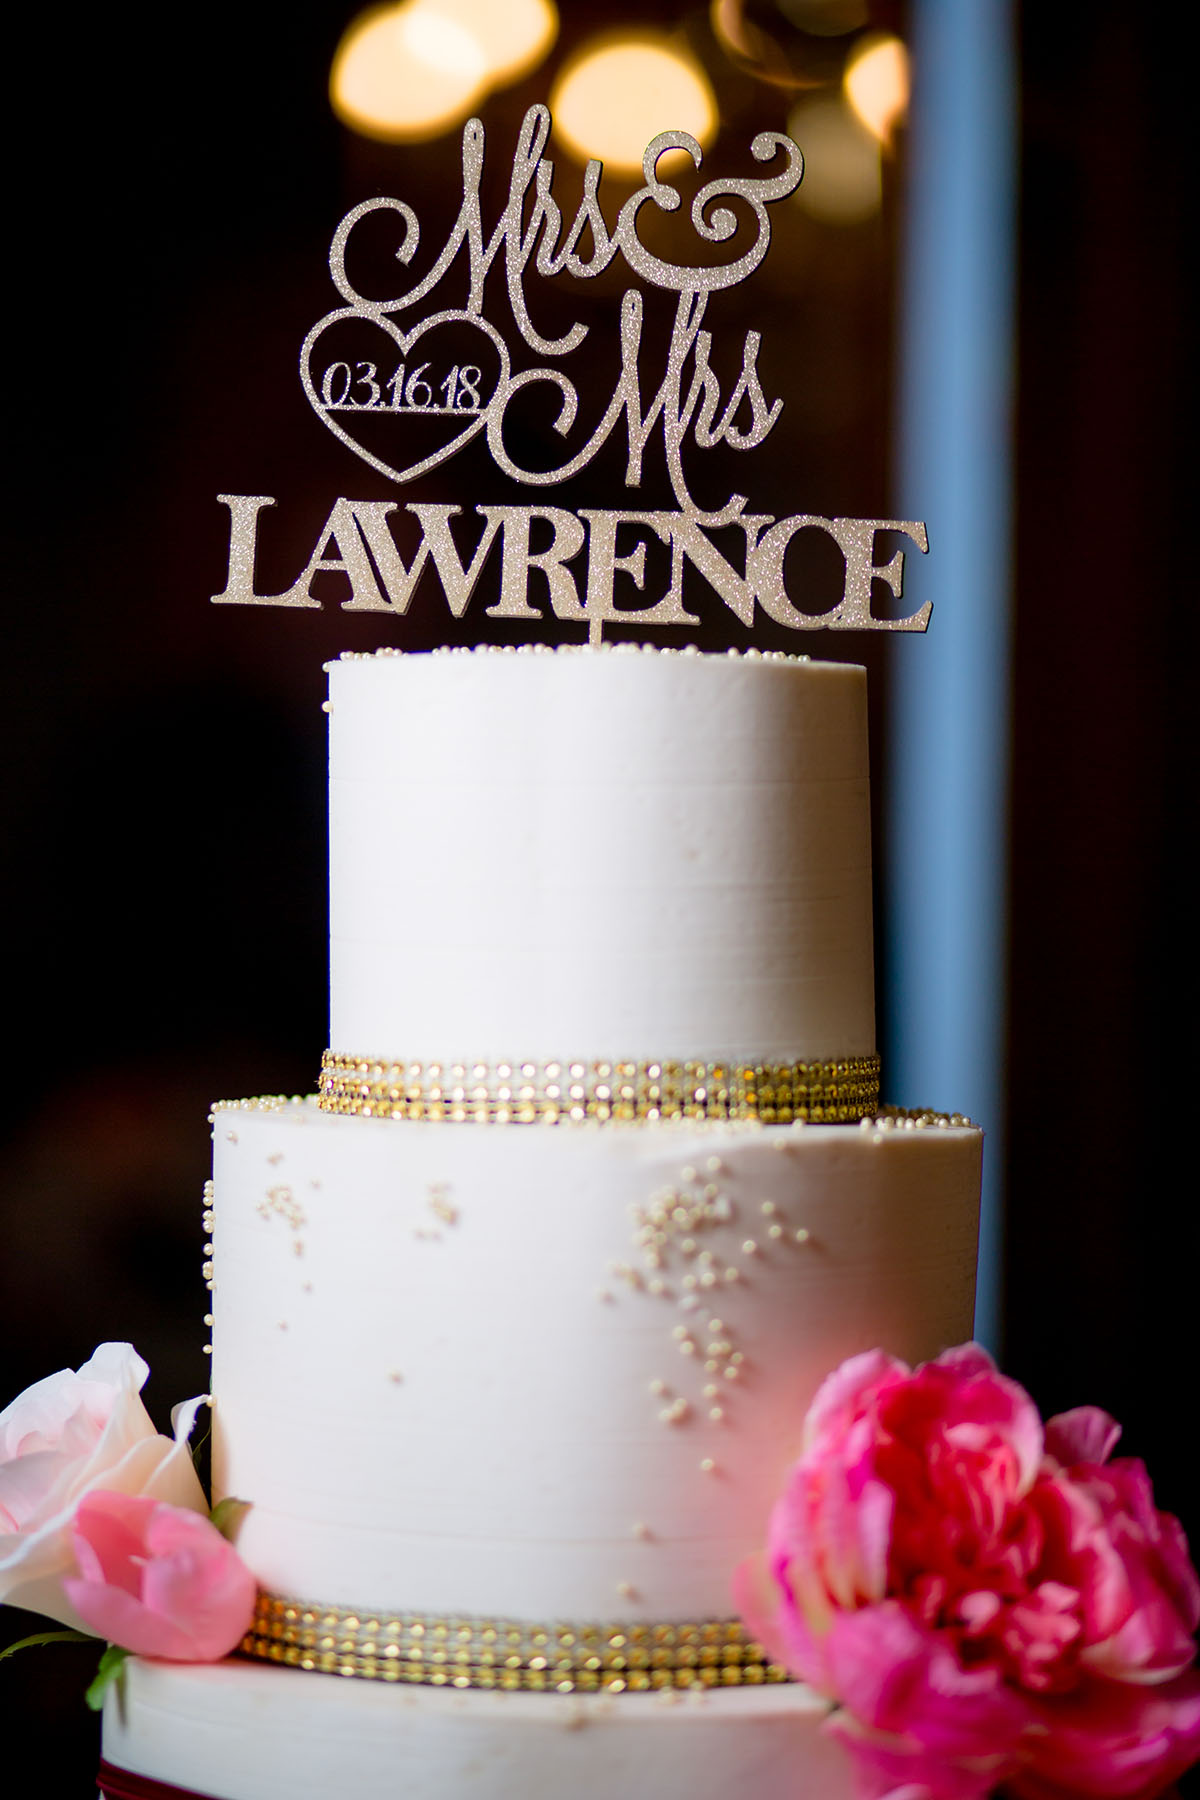 Classic purple vintage wedding in Towson, Maryland Mrs. and Mrs. Lawrence cream cake gold trim